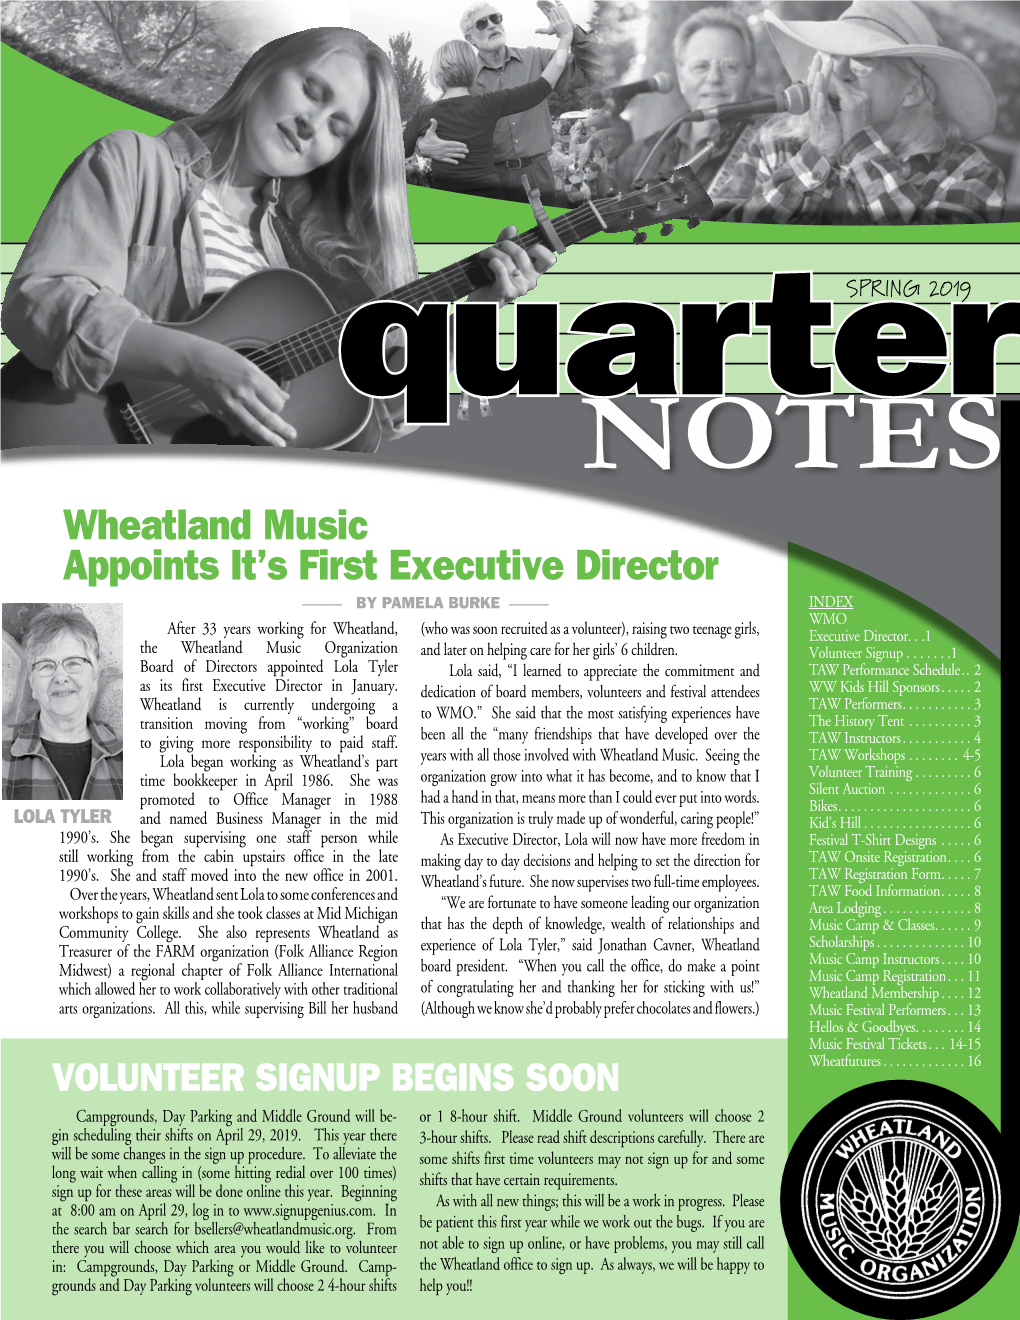 Wheatland Music Appoints It's First Executive Director